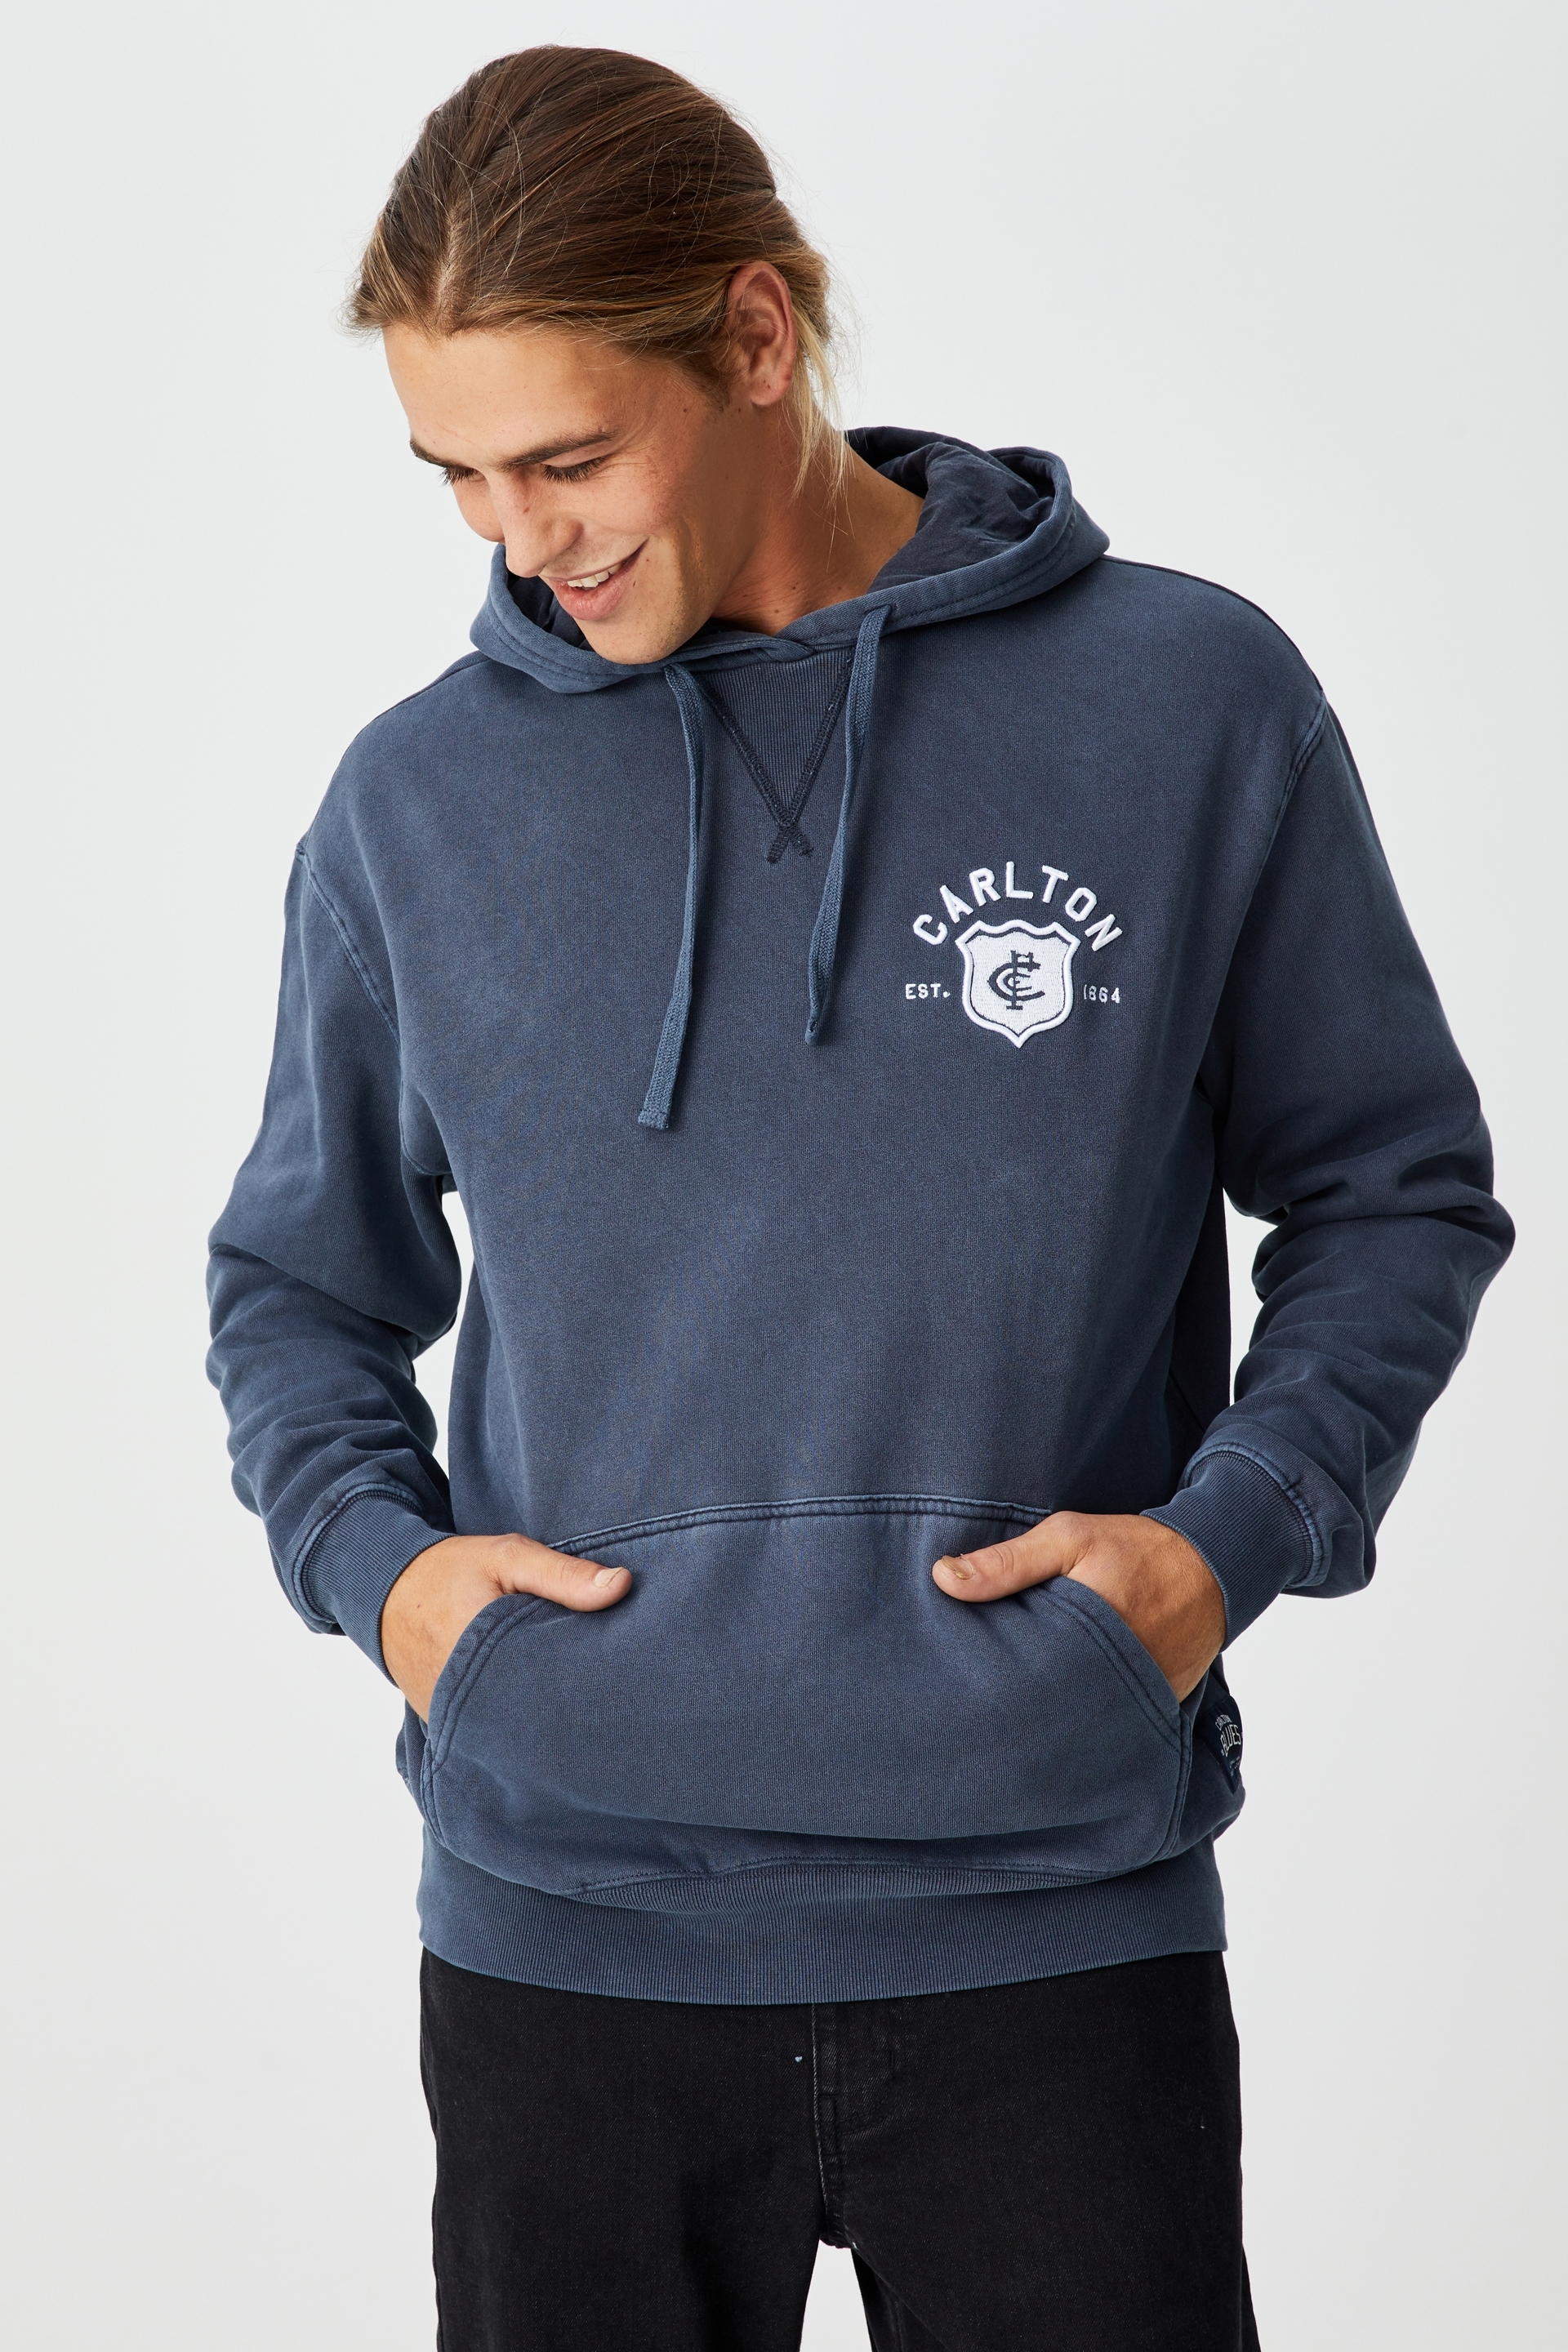 AFL - Afl Mens Chest Embroidery Hoodie - Carlton